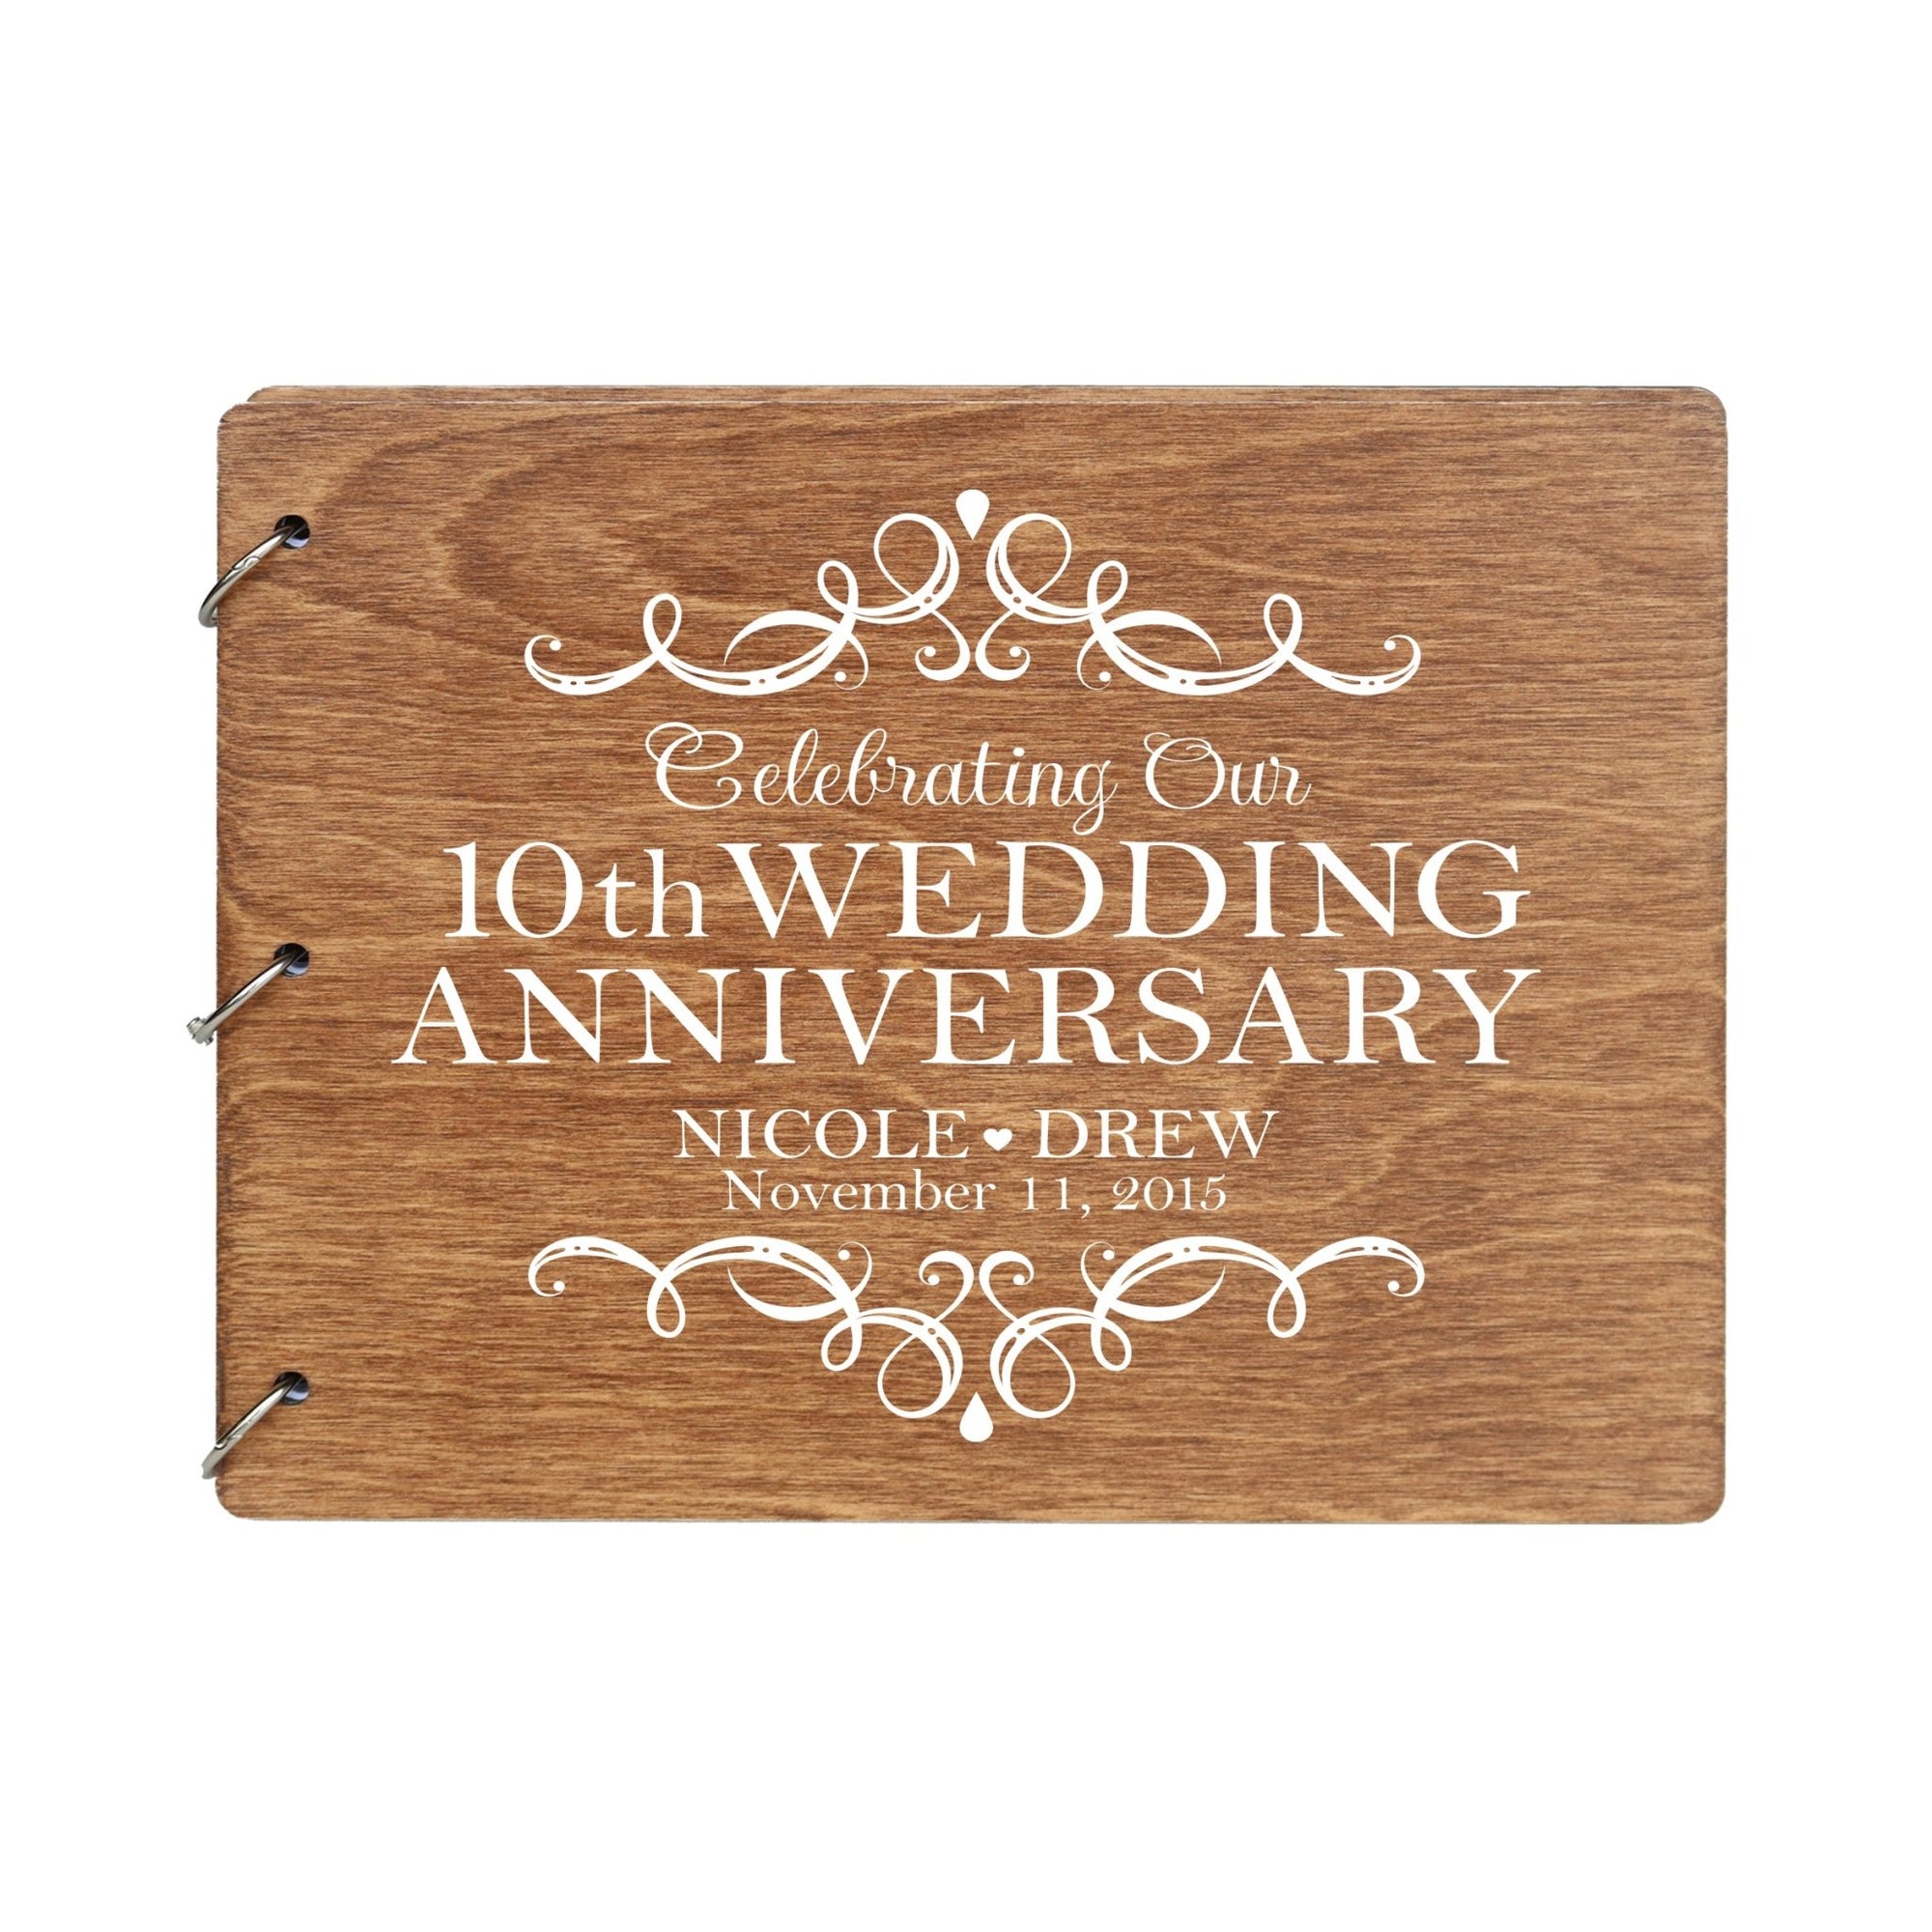 Personalized 10th Wedding Anniversary Guestbook - LifeSong Milestones